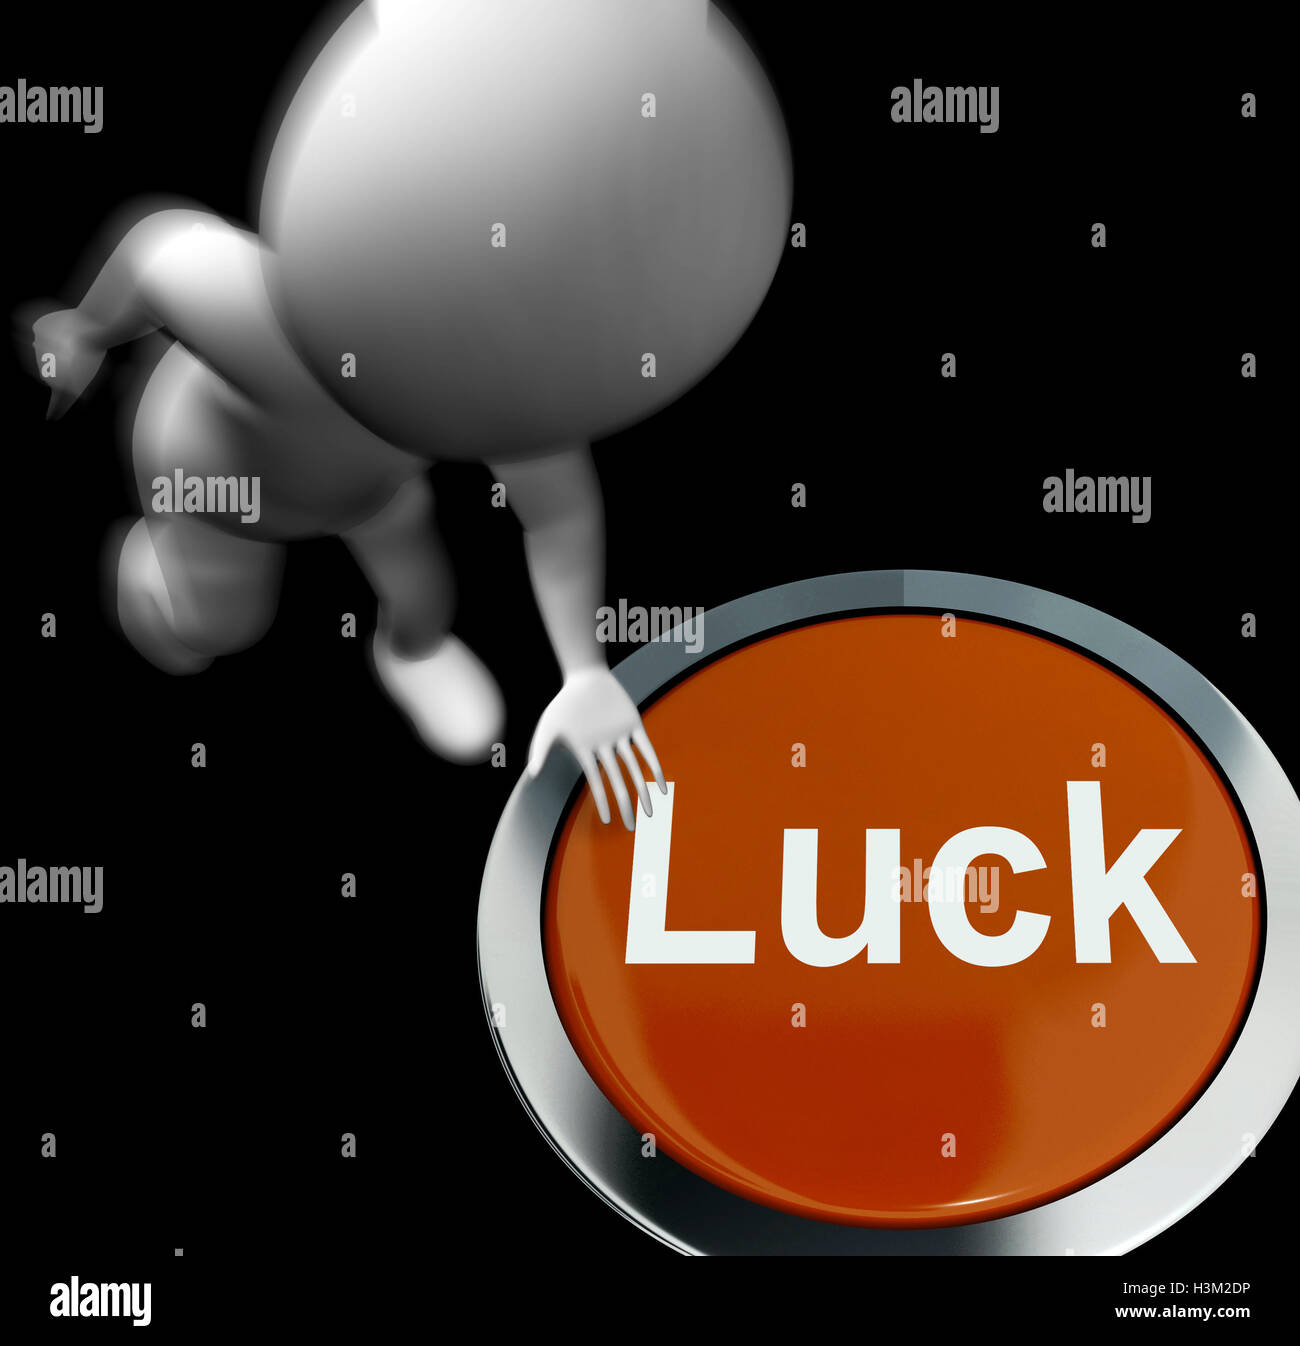 Luck Pressed Shows Chance Gamble Or Fortunate Stock Photo